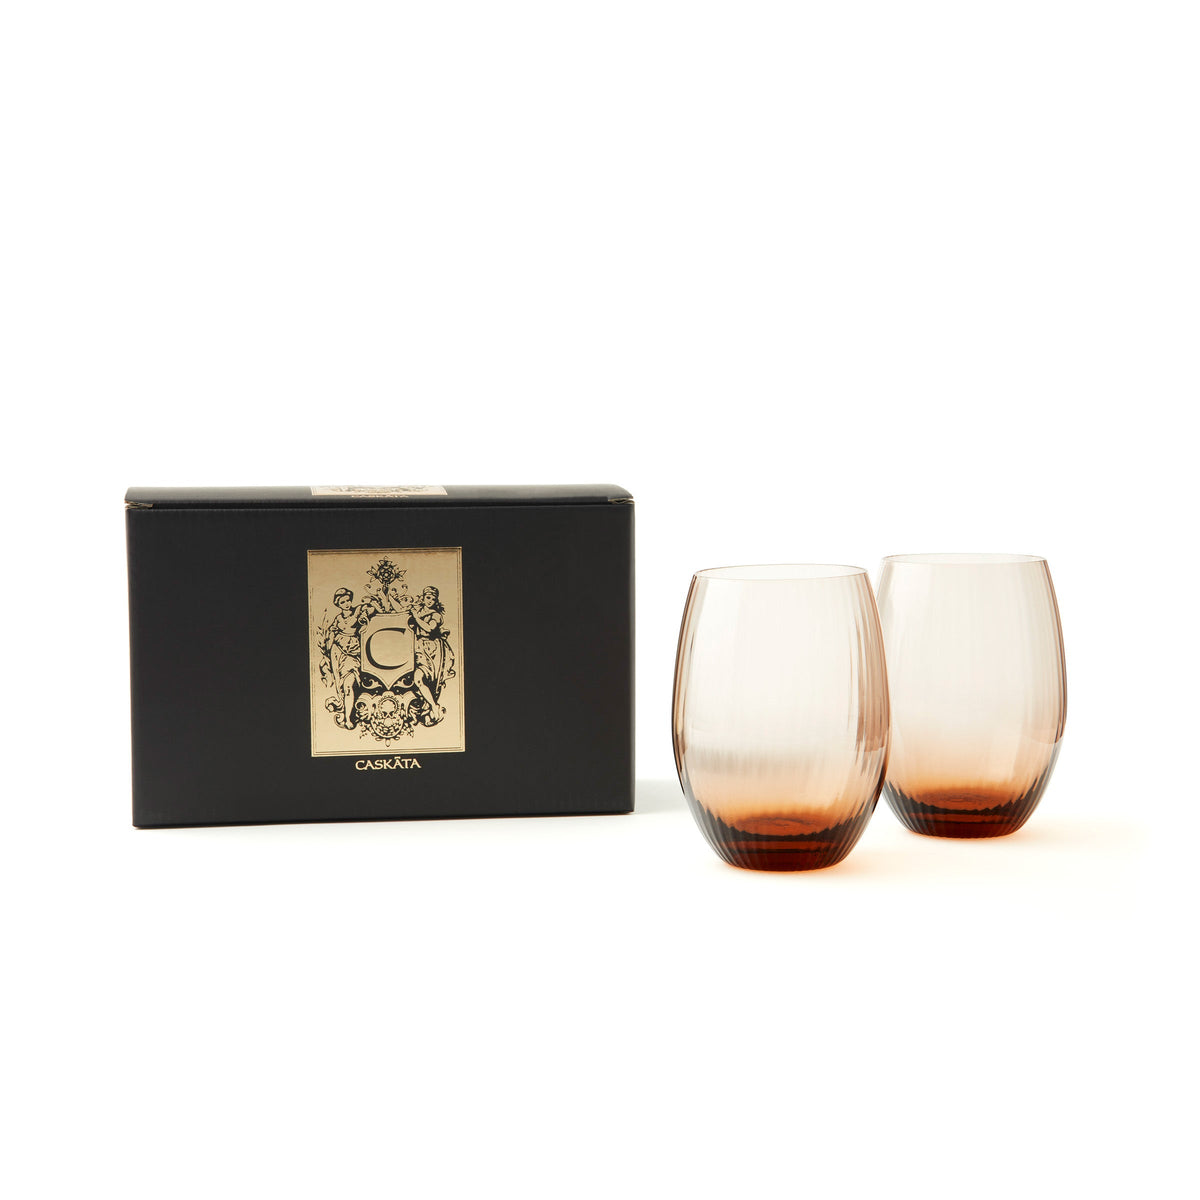 Set of 2 Quinn Amber Stemless Tumbler Wine Glasses from Caskata, with a black and gold gift box.